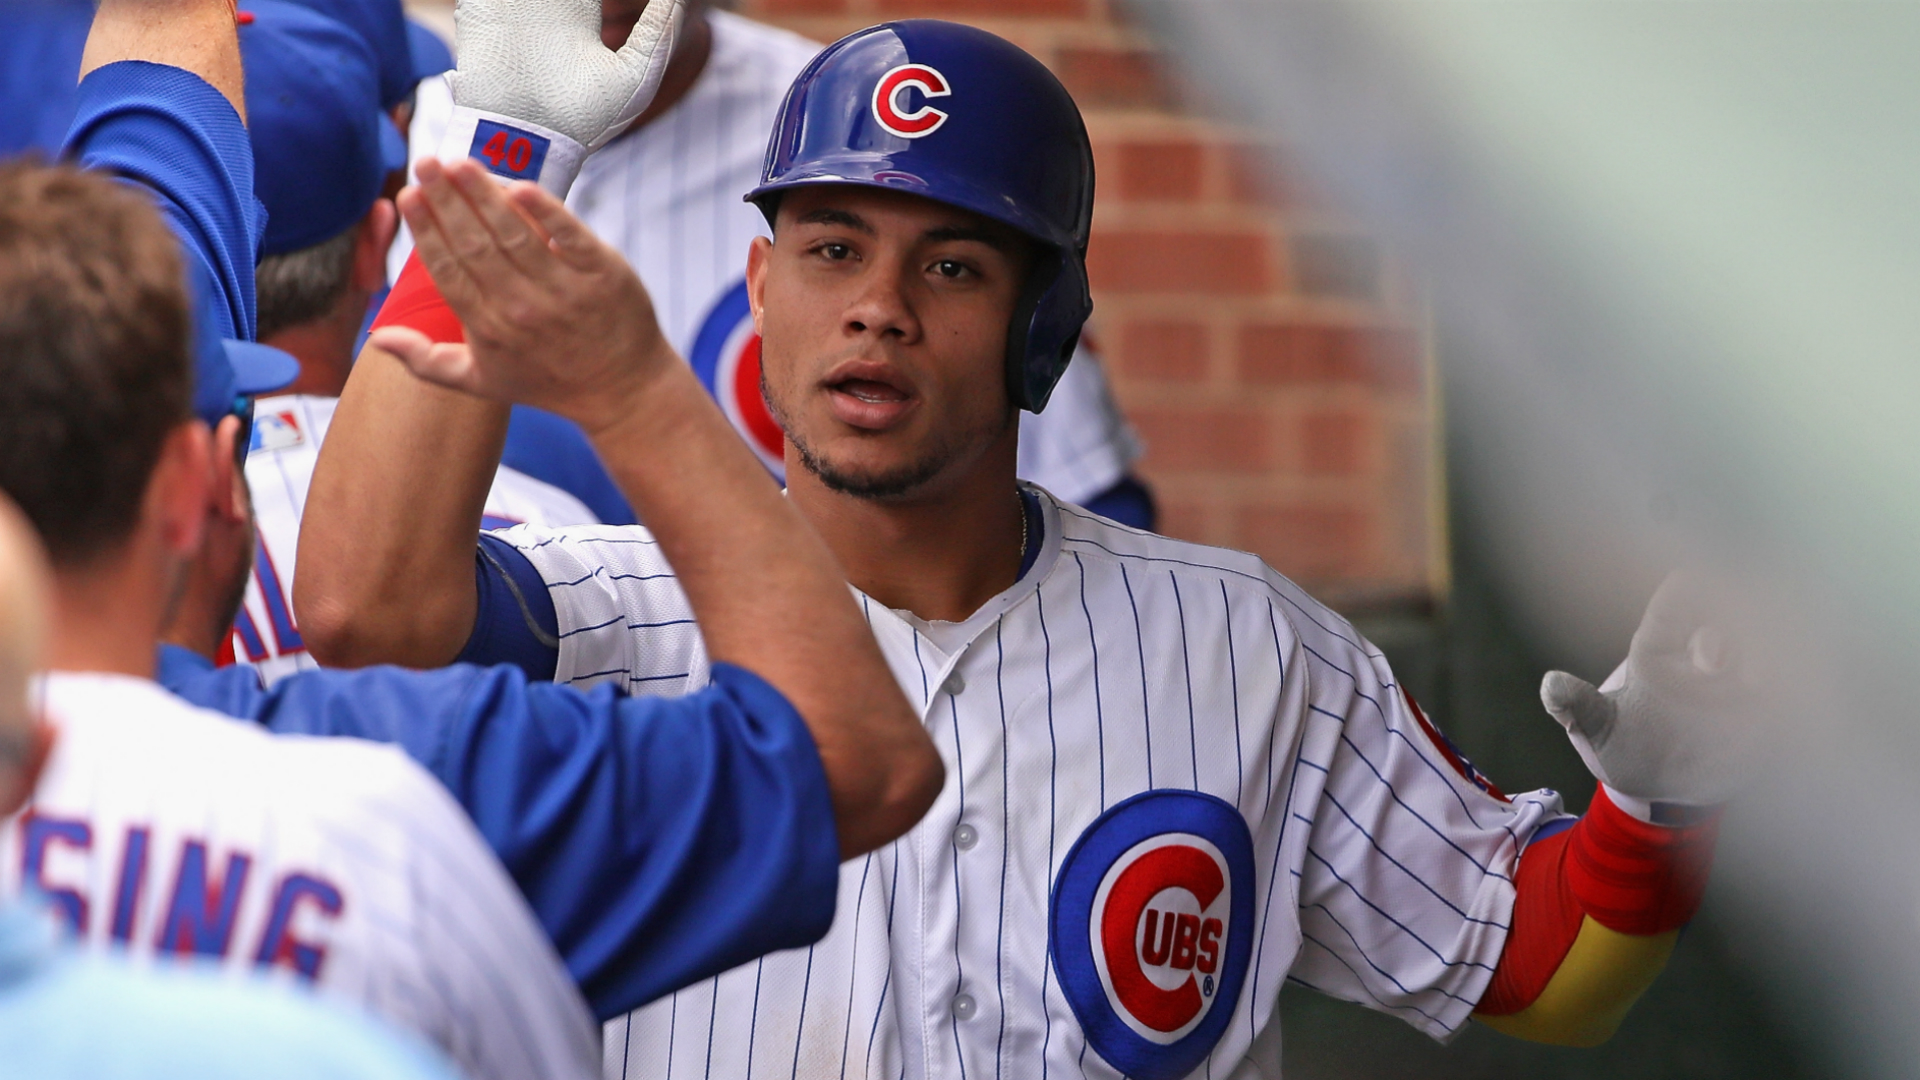 Cubs' Contreras suspended 2 games, appeals; Lackey fined